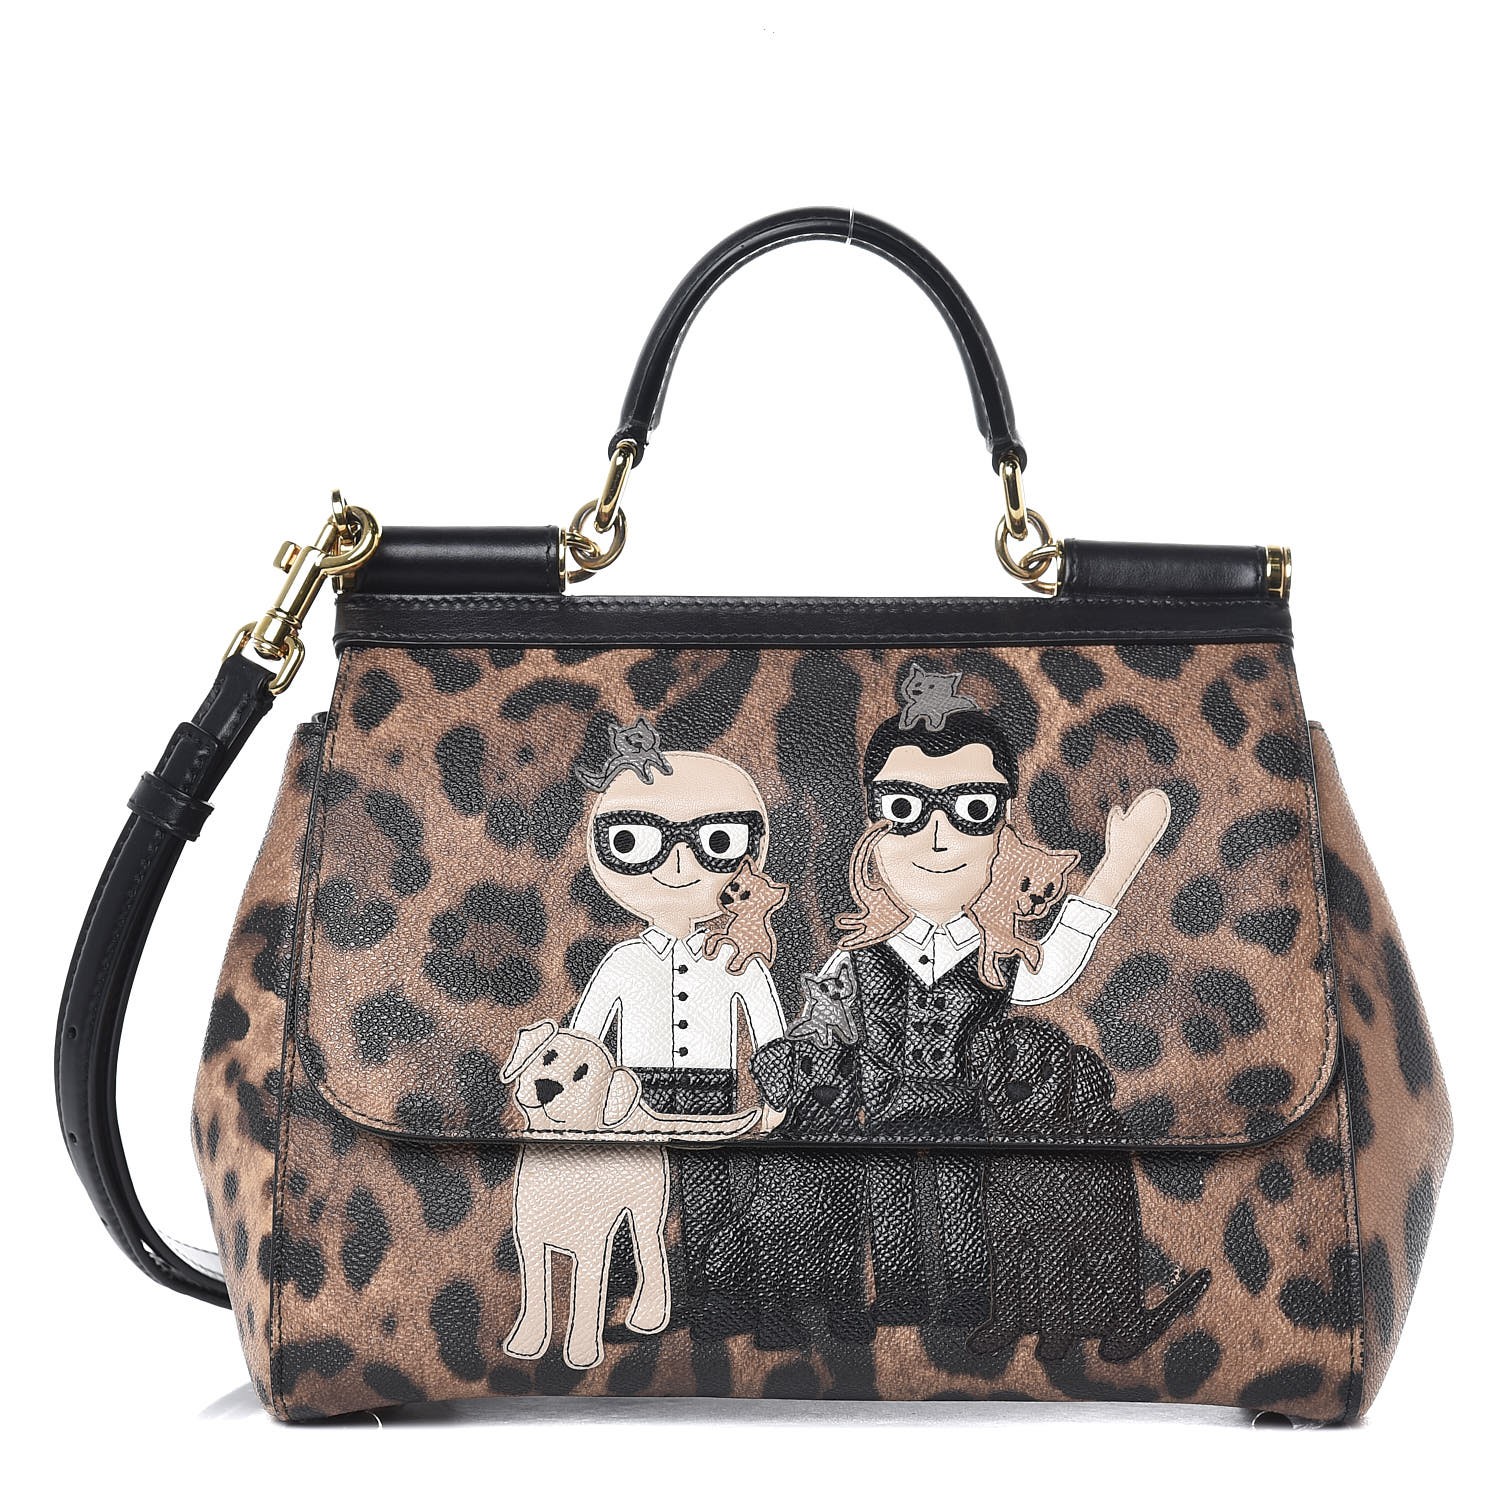 dolce and gabbana family bag